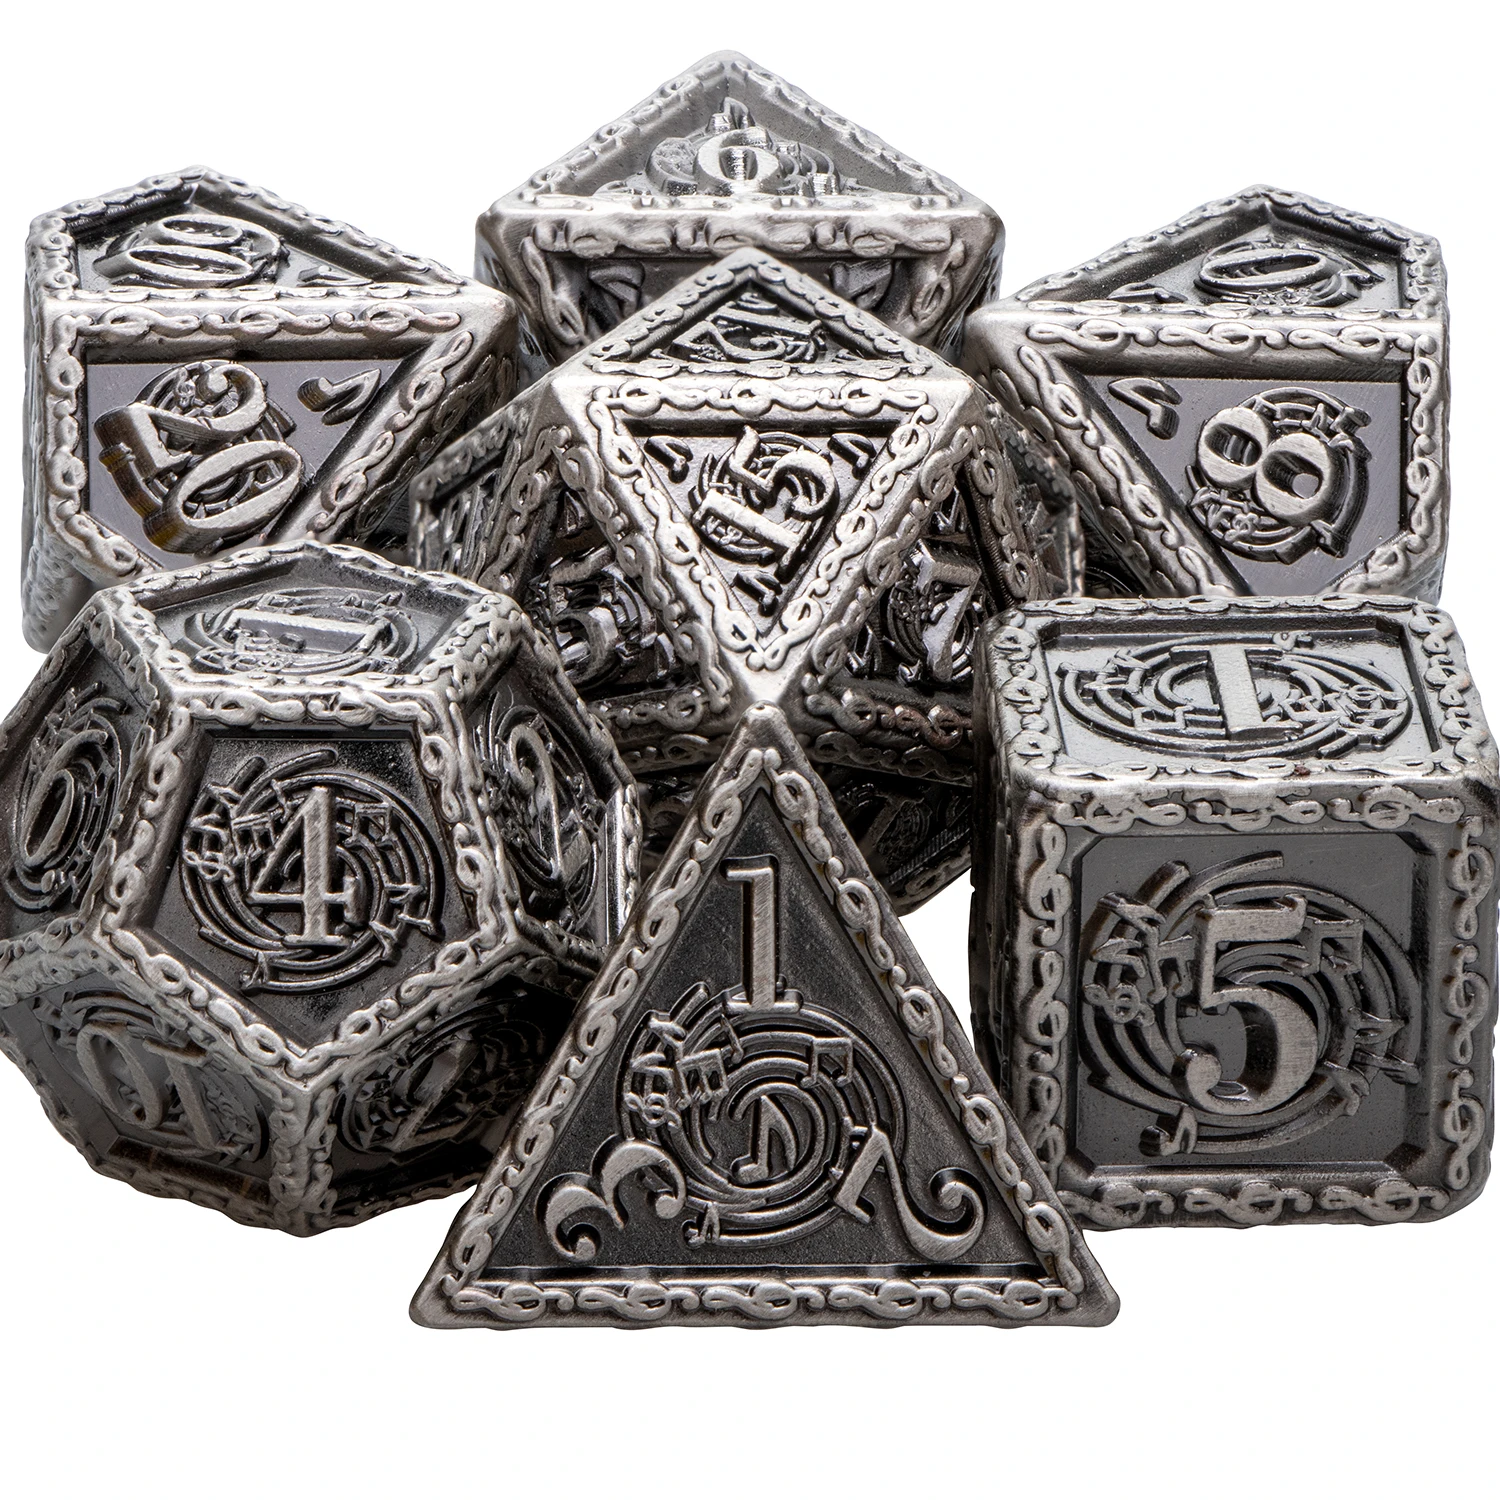 

New Grey Dnd Metal Dungeon and Dragon Pathfinder Role Playing Tabletop Game D20 D12 D10 D8 D6 D4 D% RPG&MTG Polyhedral Dice Set